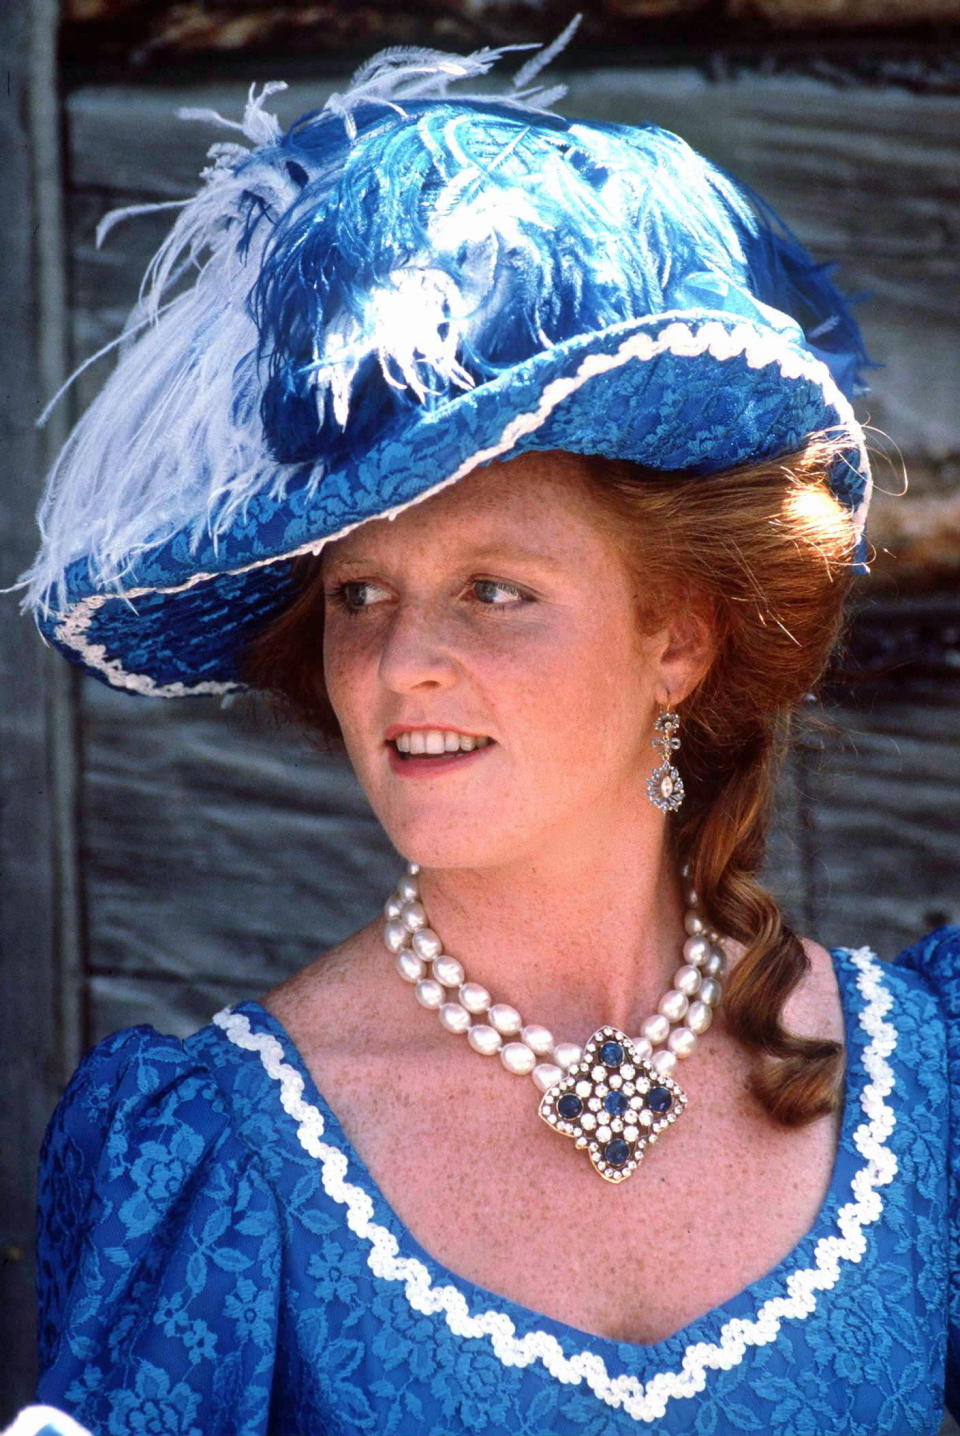 Sarah, Duchess of York, wears a large blue and white hat during a visit to&nbsp;Fort Edmonton, Canada, in July 1987.